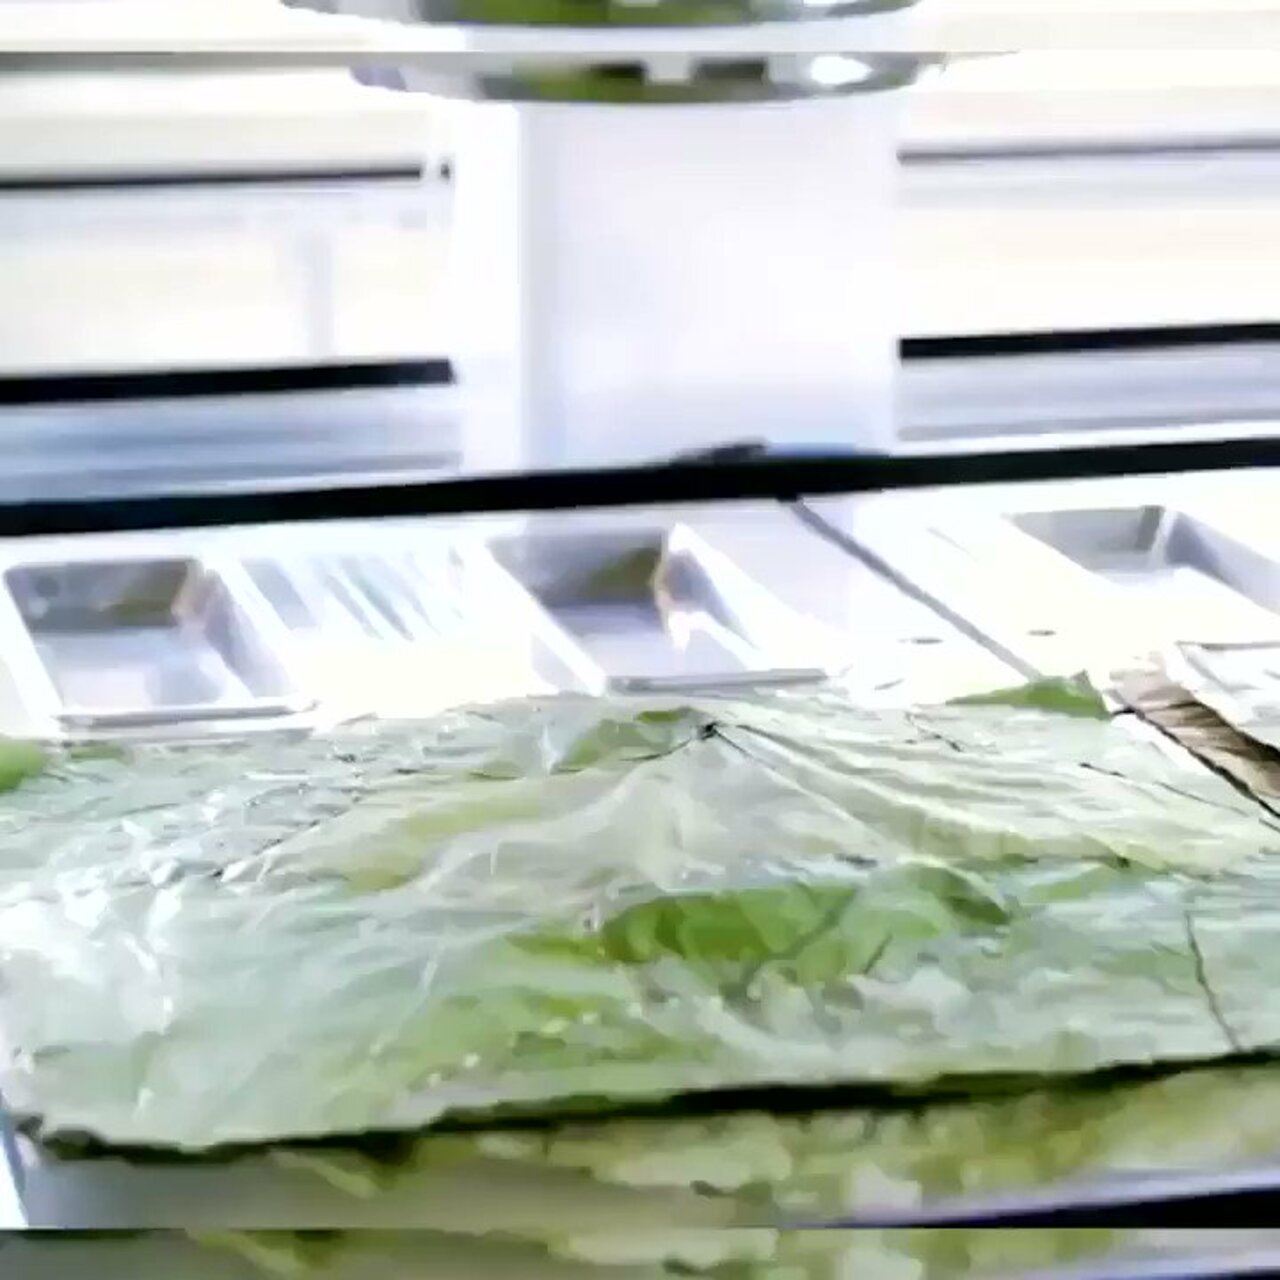 The biodegradable plates are designed to reduce plastic waste by @cheddar #Tech #Technology #Innovation #Business #Influencer #IT Cc: @enricomolinari @evankirstel @pierrepinna @helene_wpli https://t.co/RCik3MgvQw